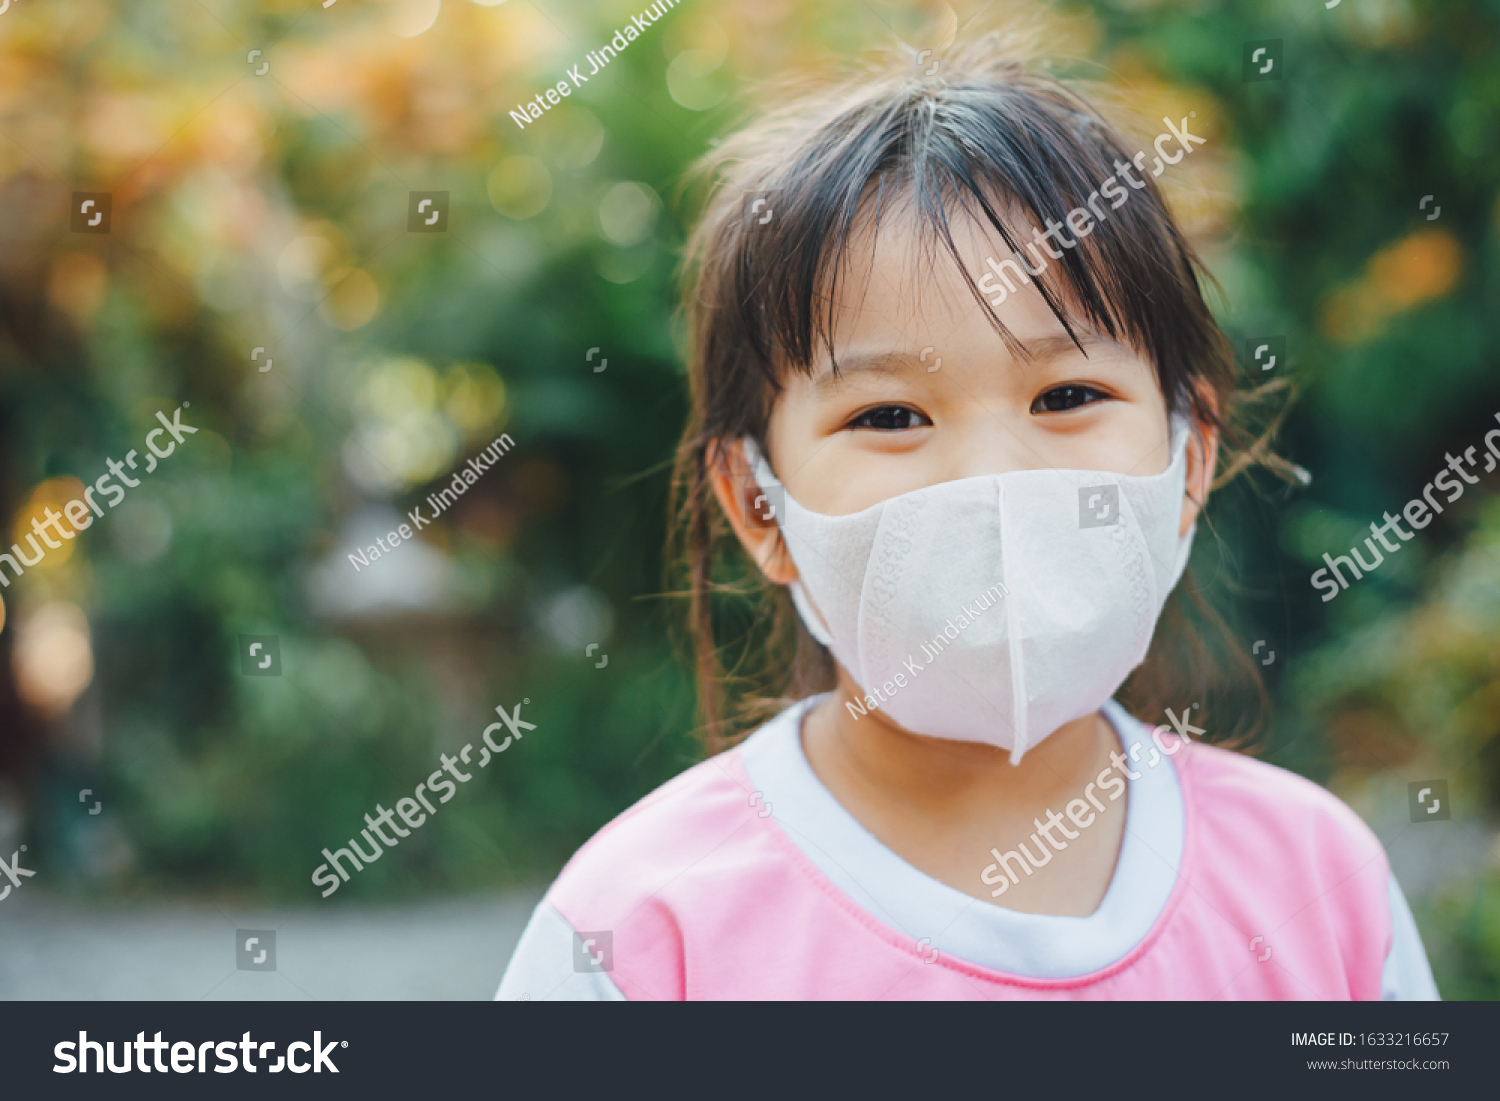 Kids wearing the mask for protect them self from virus and air pollution. Prevention by mask to reduce spread of the coronavirus (covid-19) outbreak from human to human transmission. #1633216657